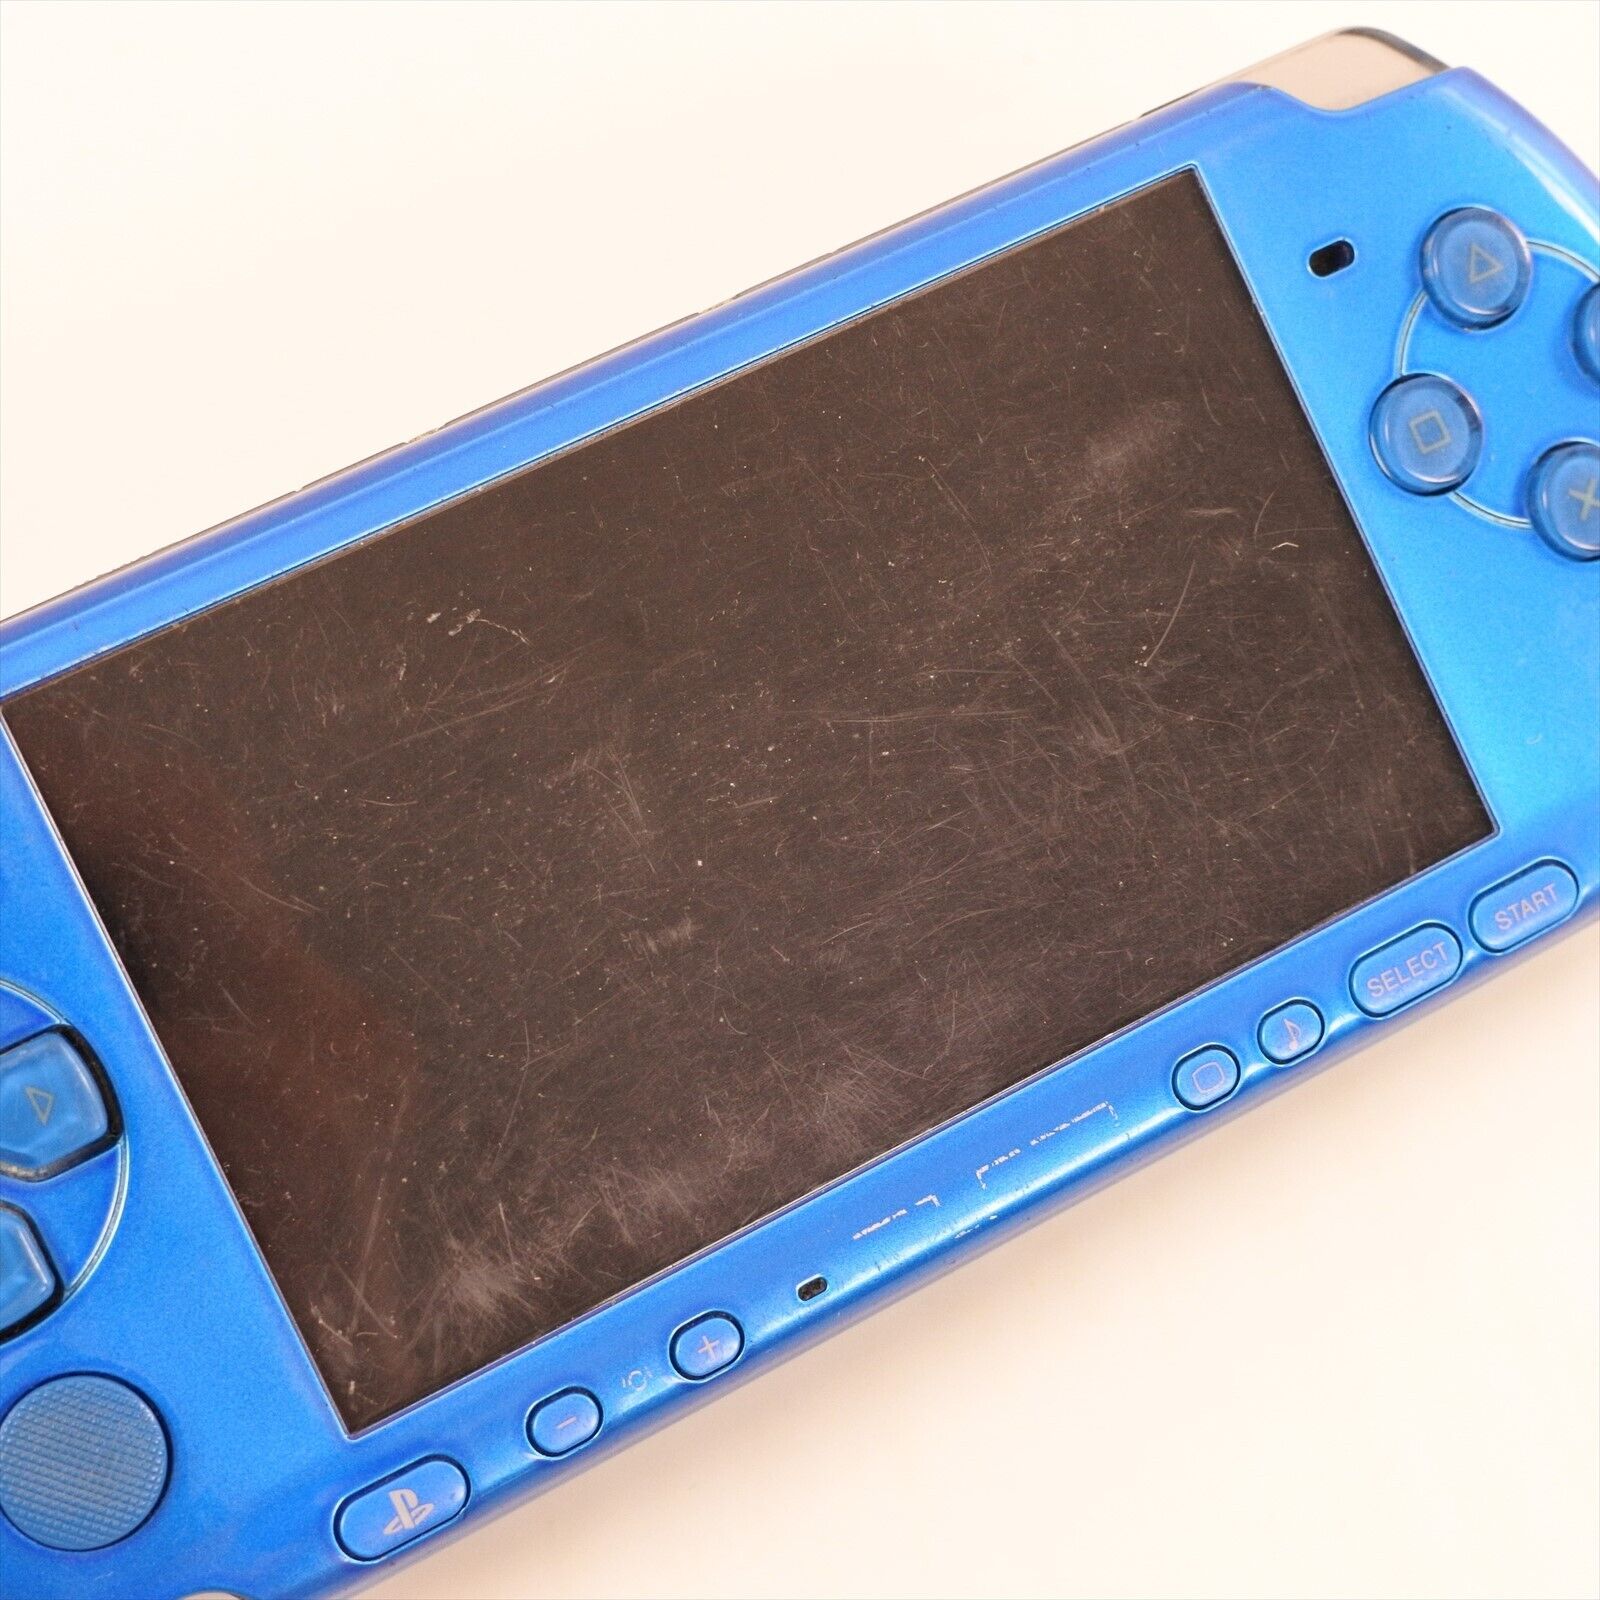 Sony PSP-3000 Vibrant Blue Handheld Console for sale online | eBay